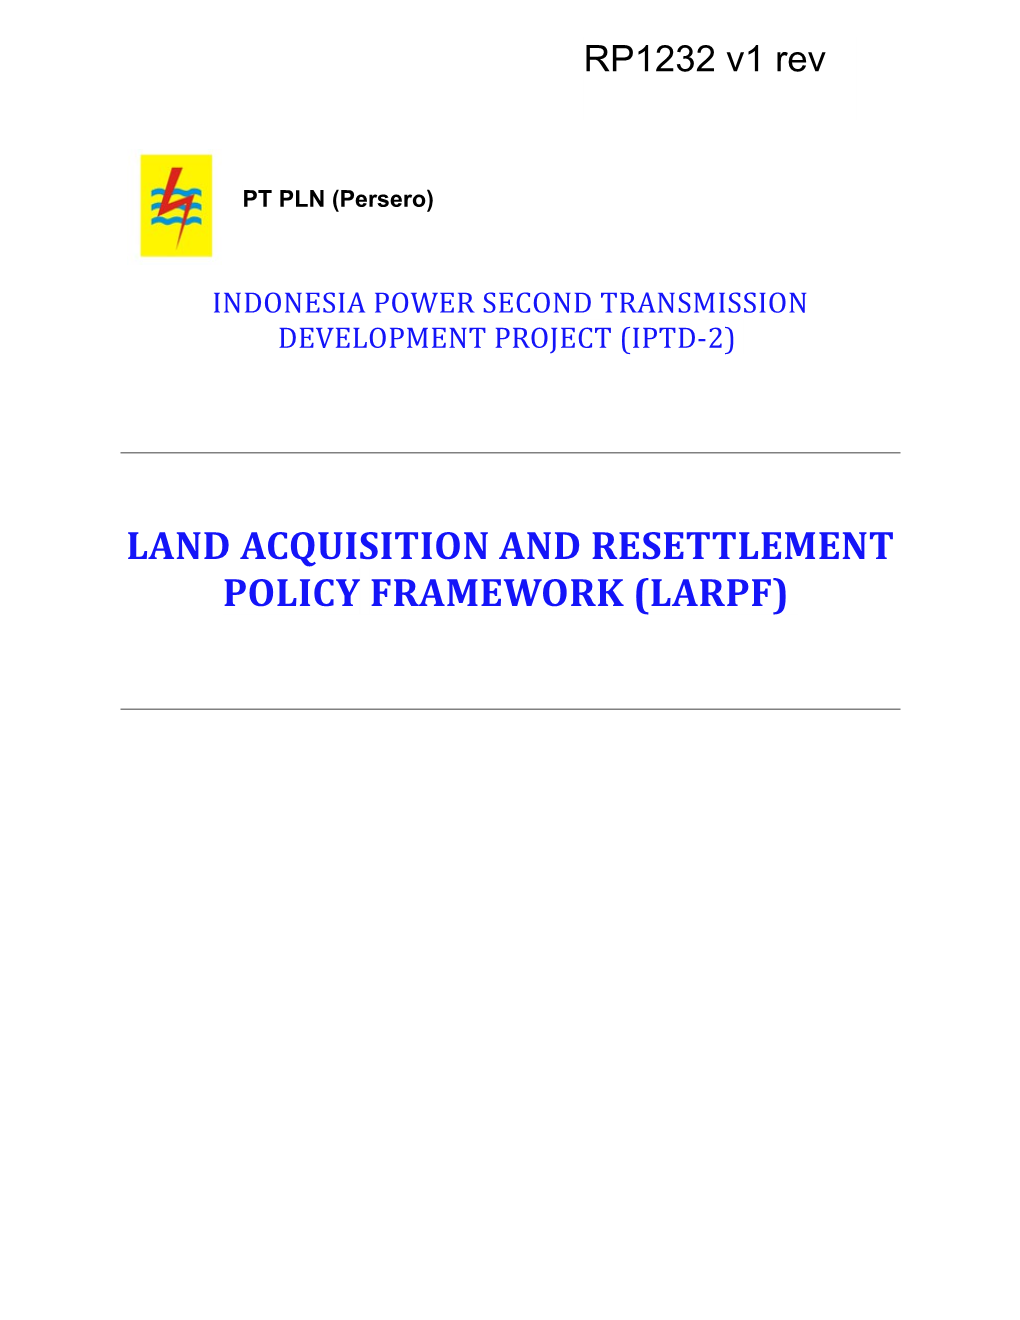 Land Acquisition and Resettlement Policy Framework (Larpf)